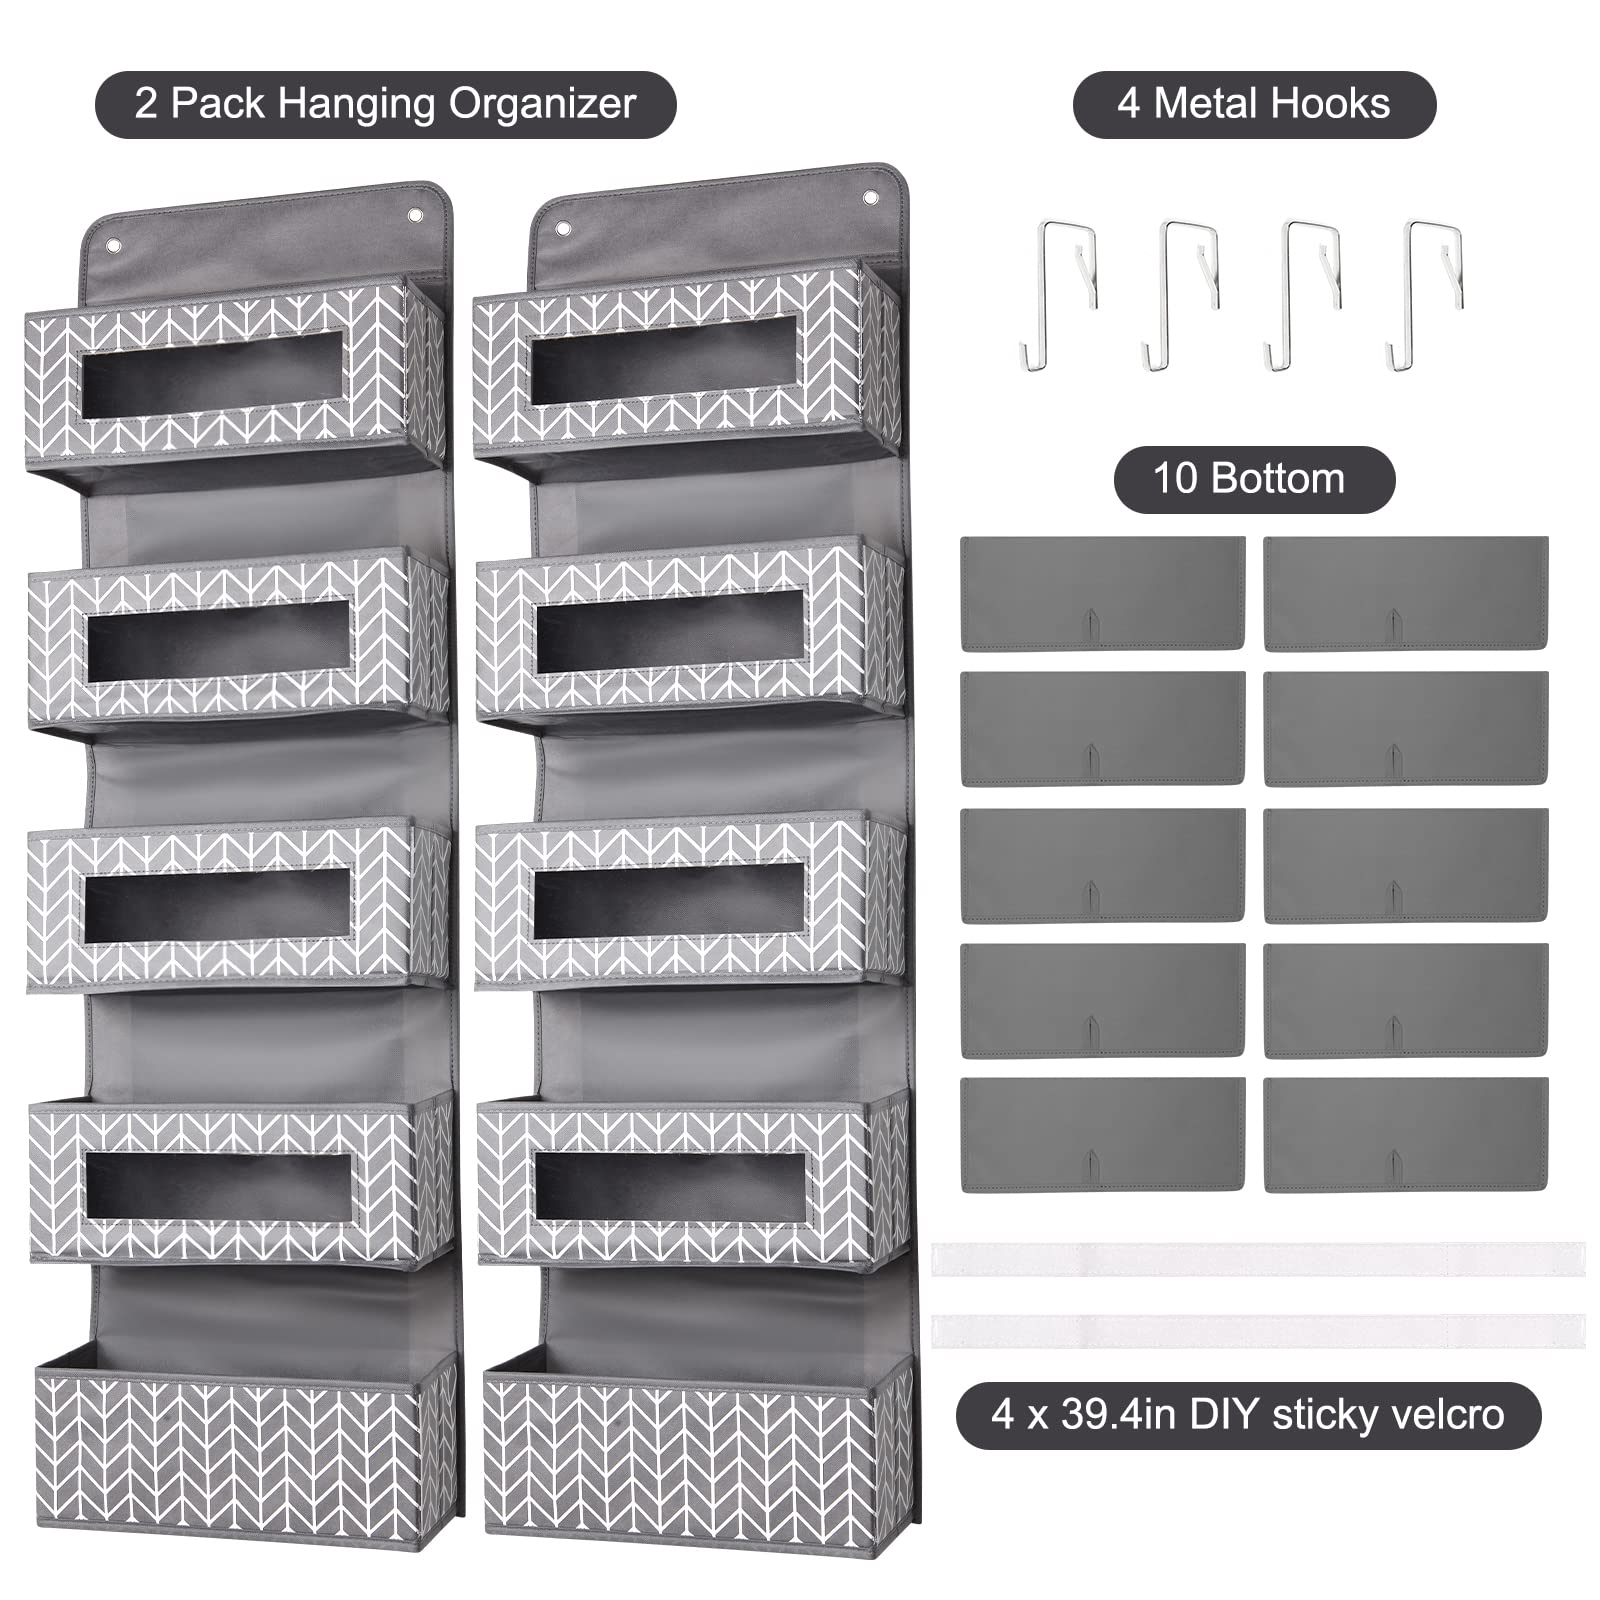 Mayniu 2 Pack Over the Door Organizer, Wall Mount Hanging Organizer Storage with 10 Large Capacity Pockets for Nursery, Closet, Toys, Diapers, and Sundries (Grey)